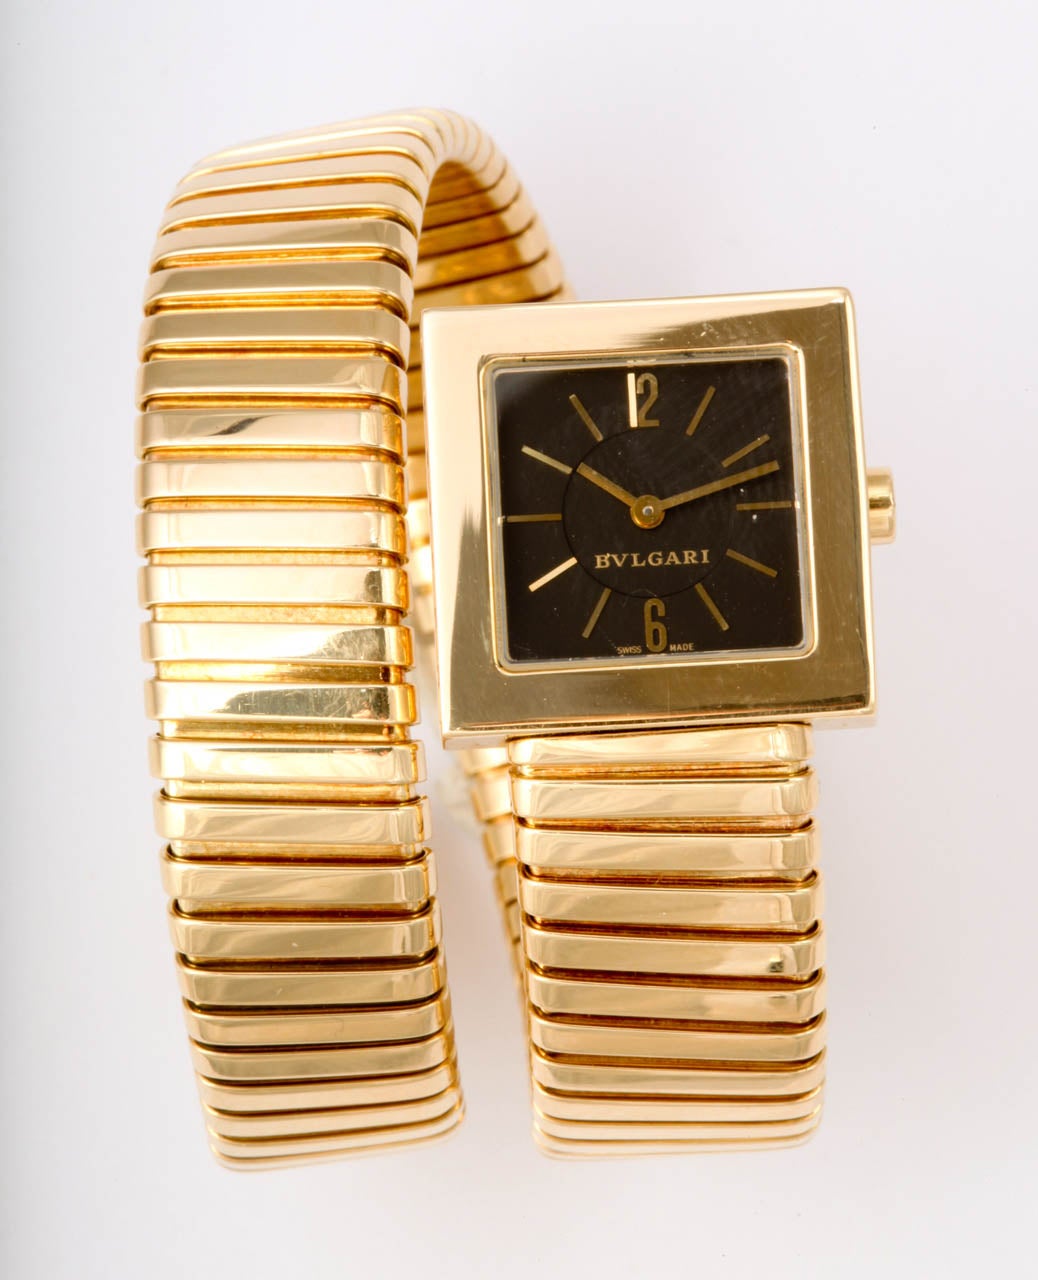 Bulgari 18k yellow gold Tubogas Serpenti bracelet watch featuring one snake wrap and a square dial.